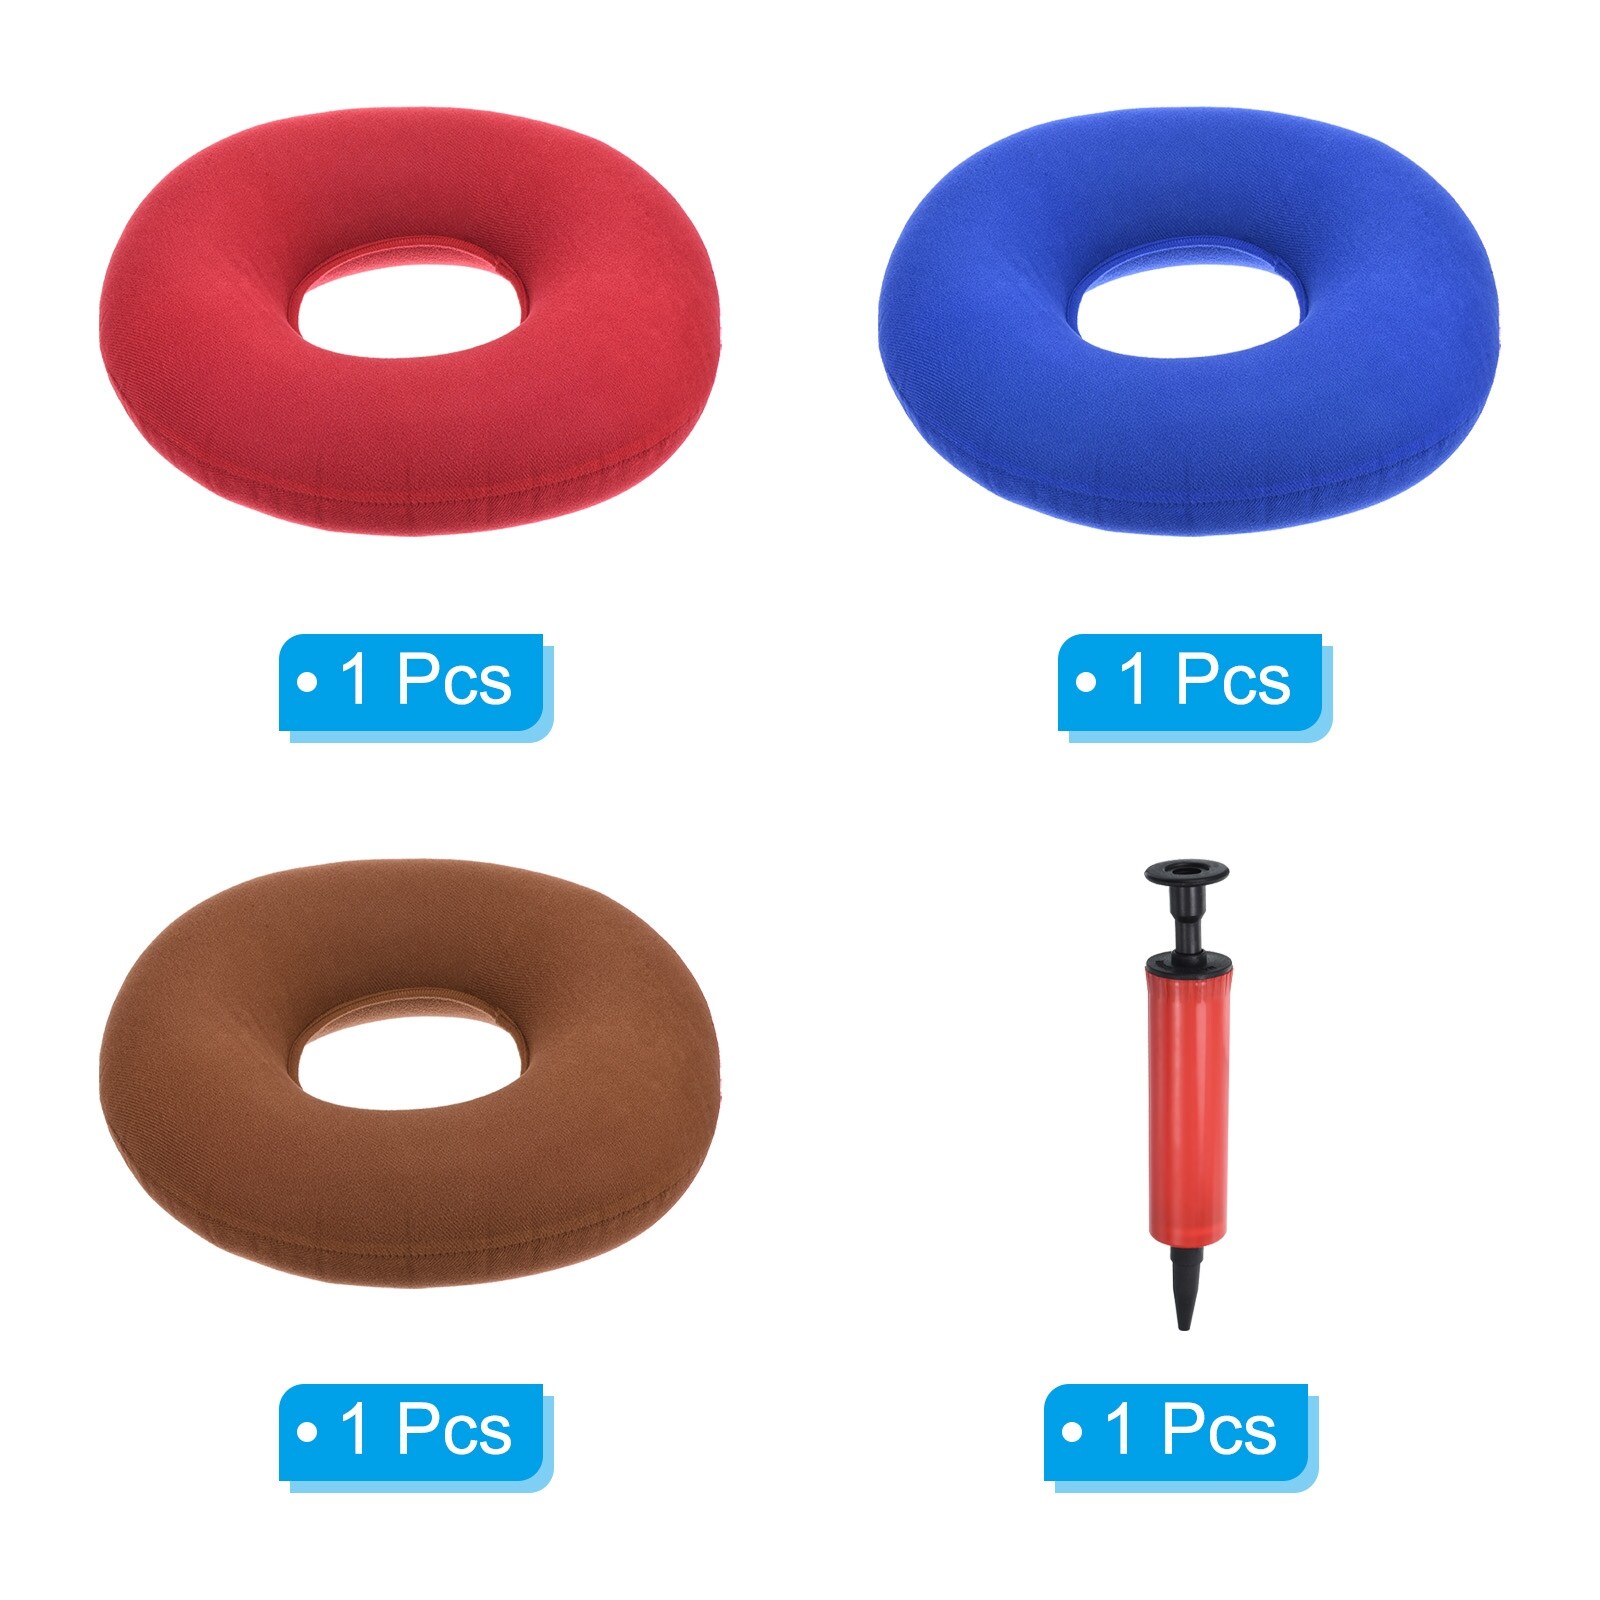 https://ak1.ostkcdn.com/images/products/is/images/direct/b79303474878f54416d253ec6aa4a86442acf4fe/3pcs-Inflatable-Seat-Cushion%2C-Portable-Donut-Cushion-Seat-Ring-Pillow%2C-3-Colors.jpg